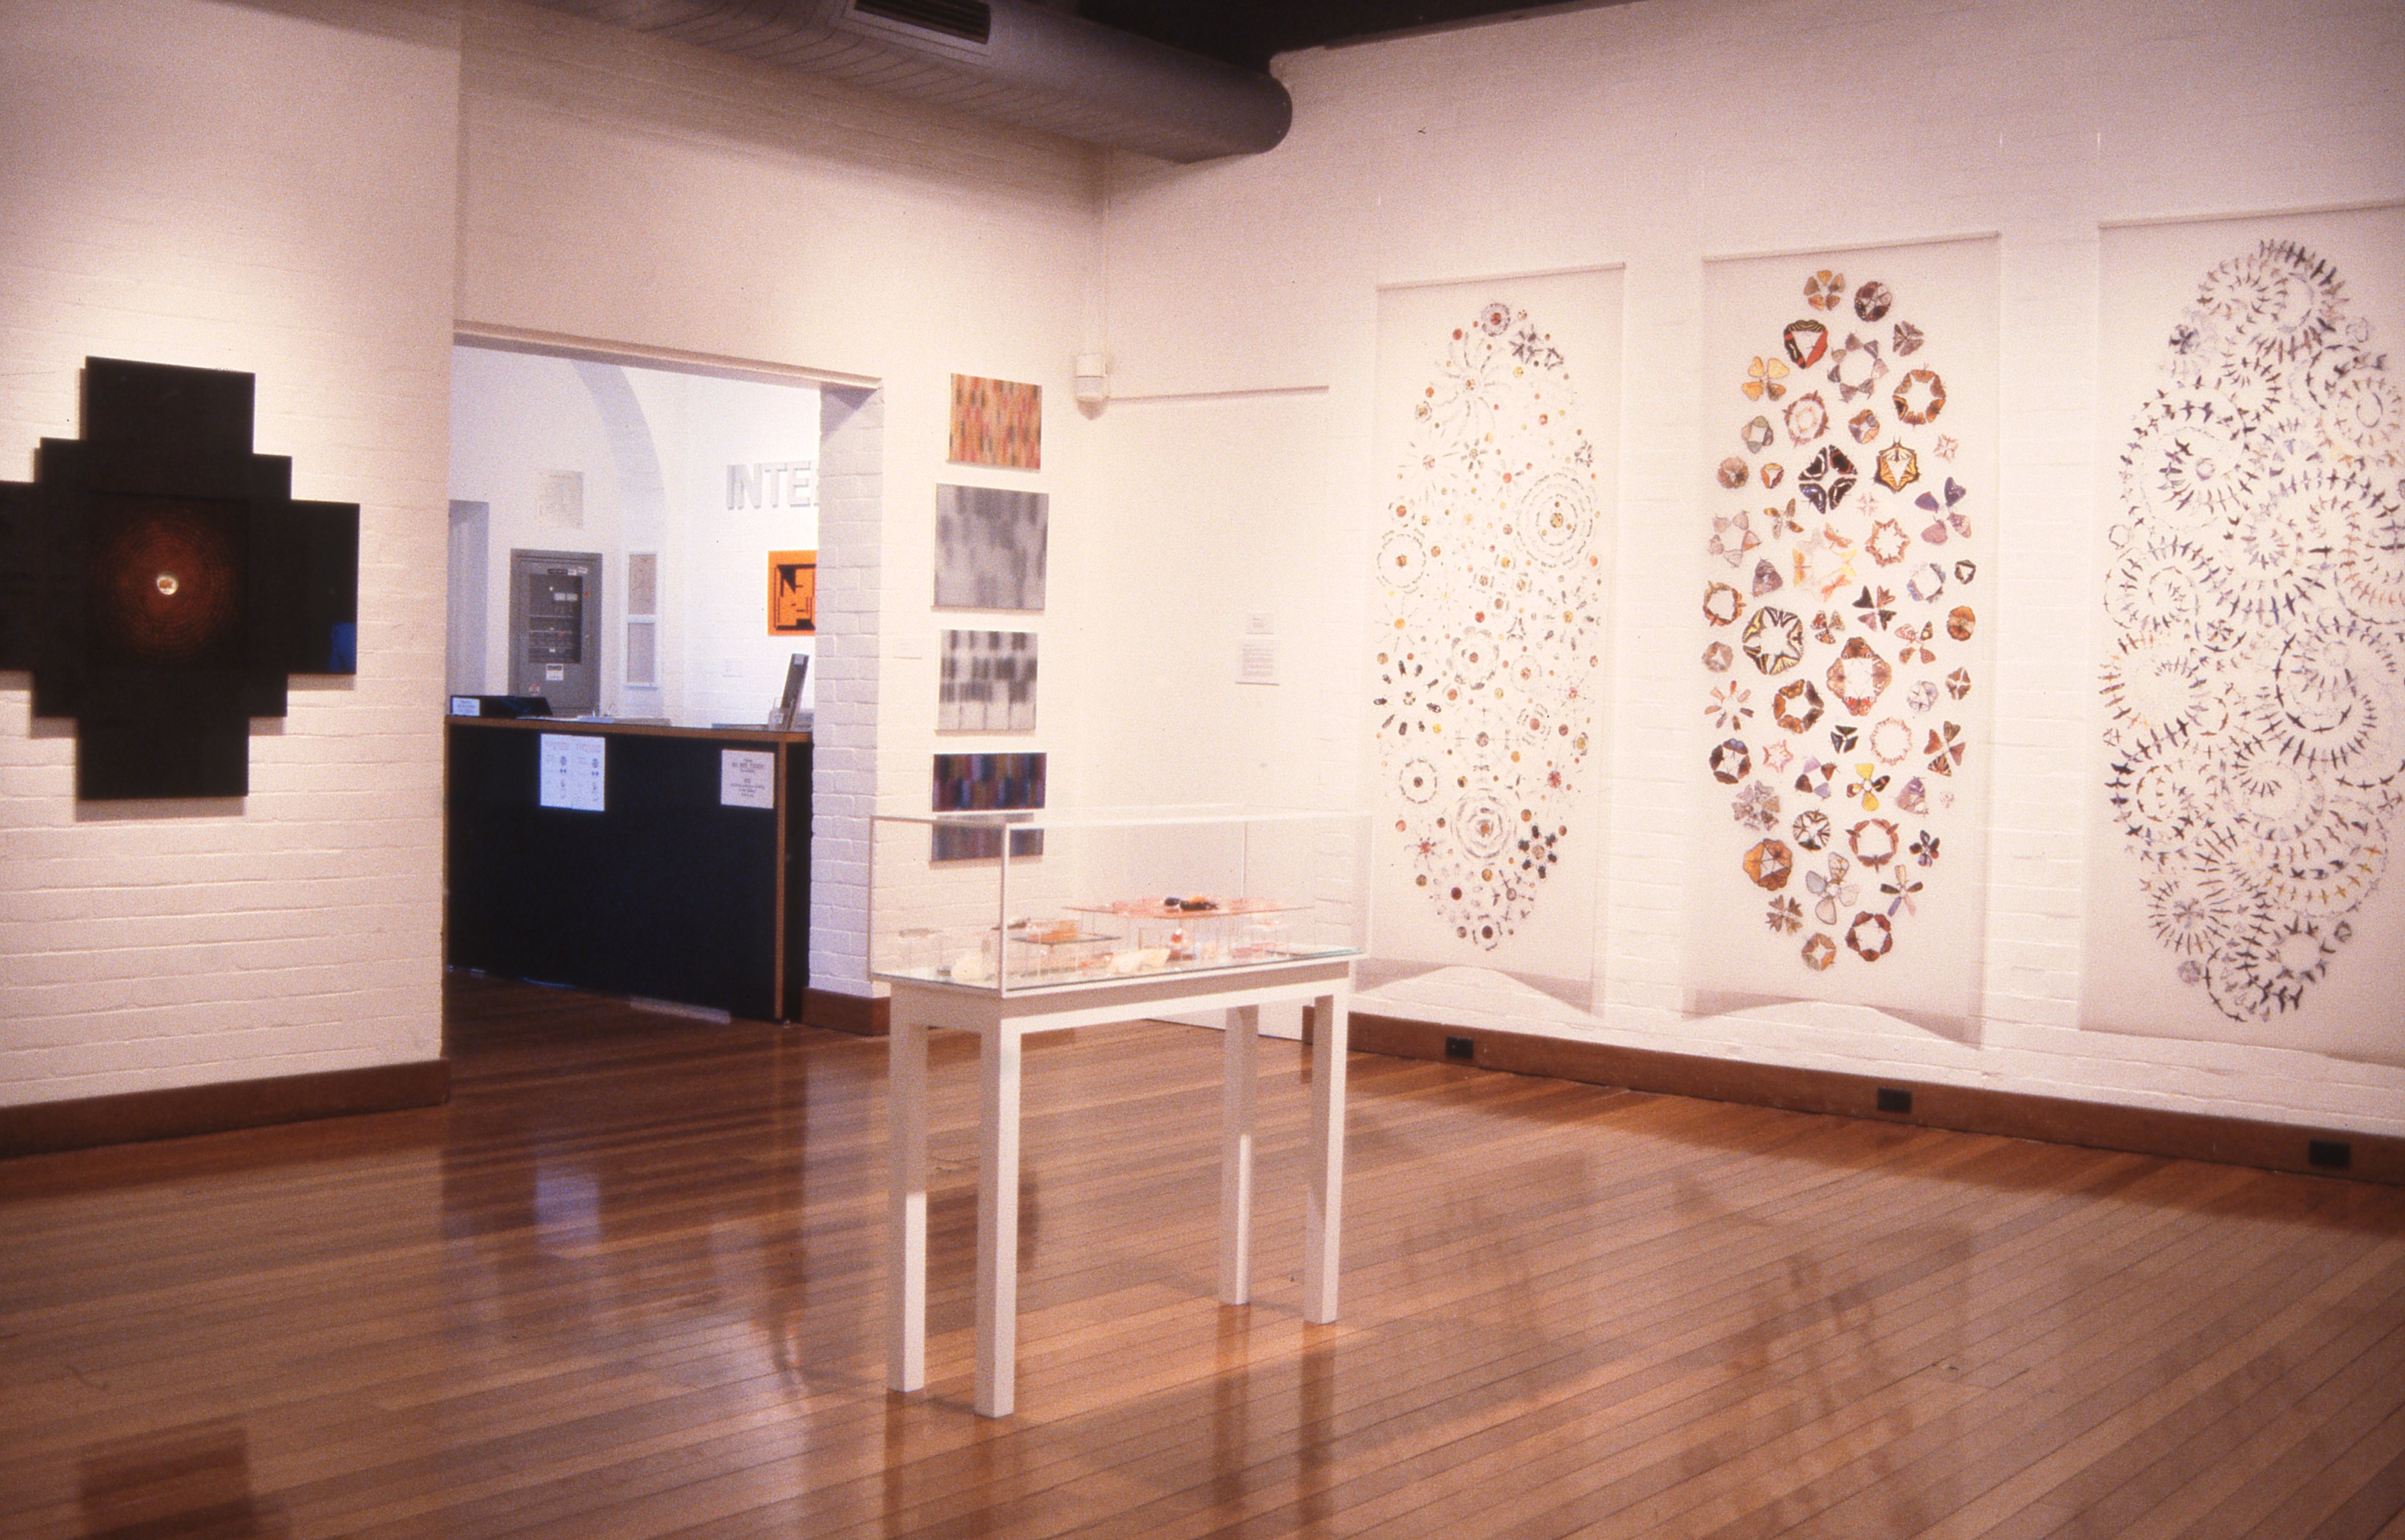 idg_archive_2001_intersections_of_art_and_science_001_install.jpg